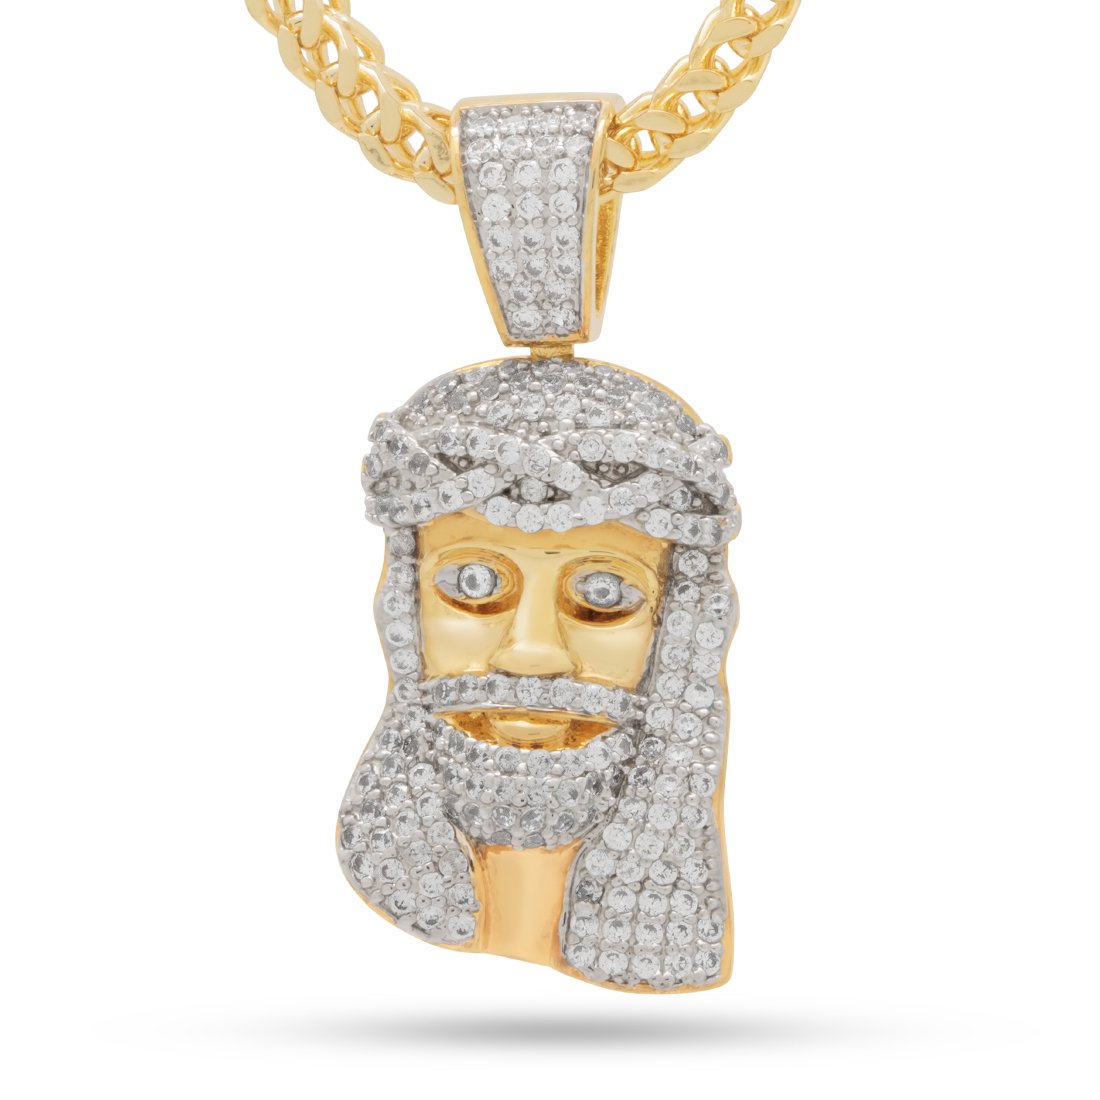 Two-Tone Jesus Necklace small 14K/White Gold / 1.3"